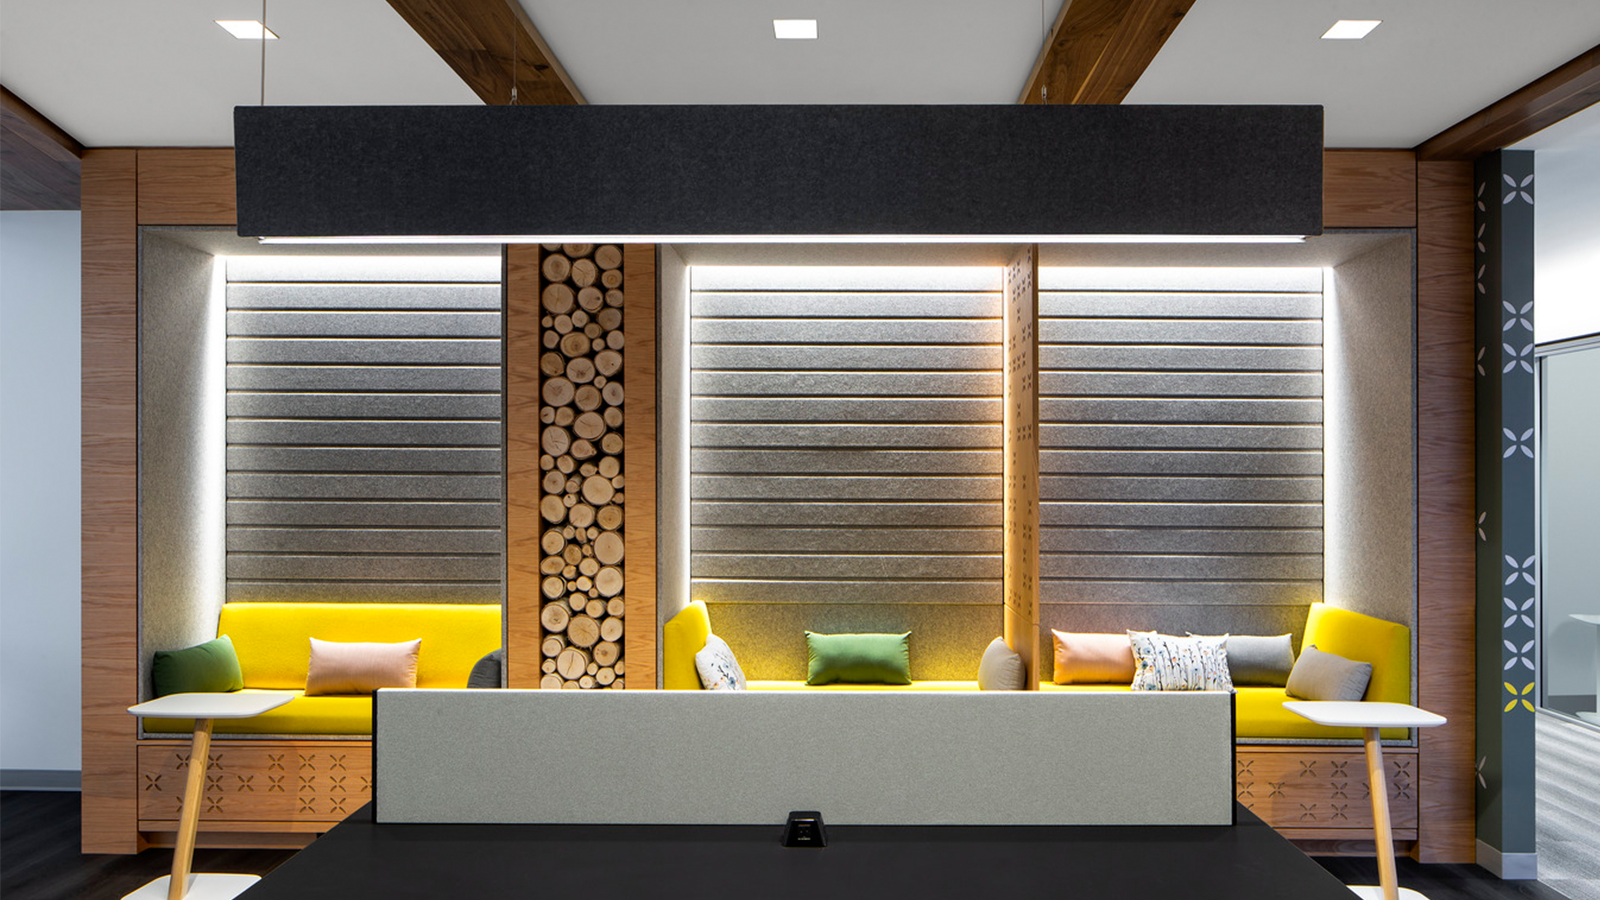 Acoustic partitions provide sound absorption in McLean, Virginia